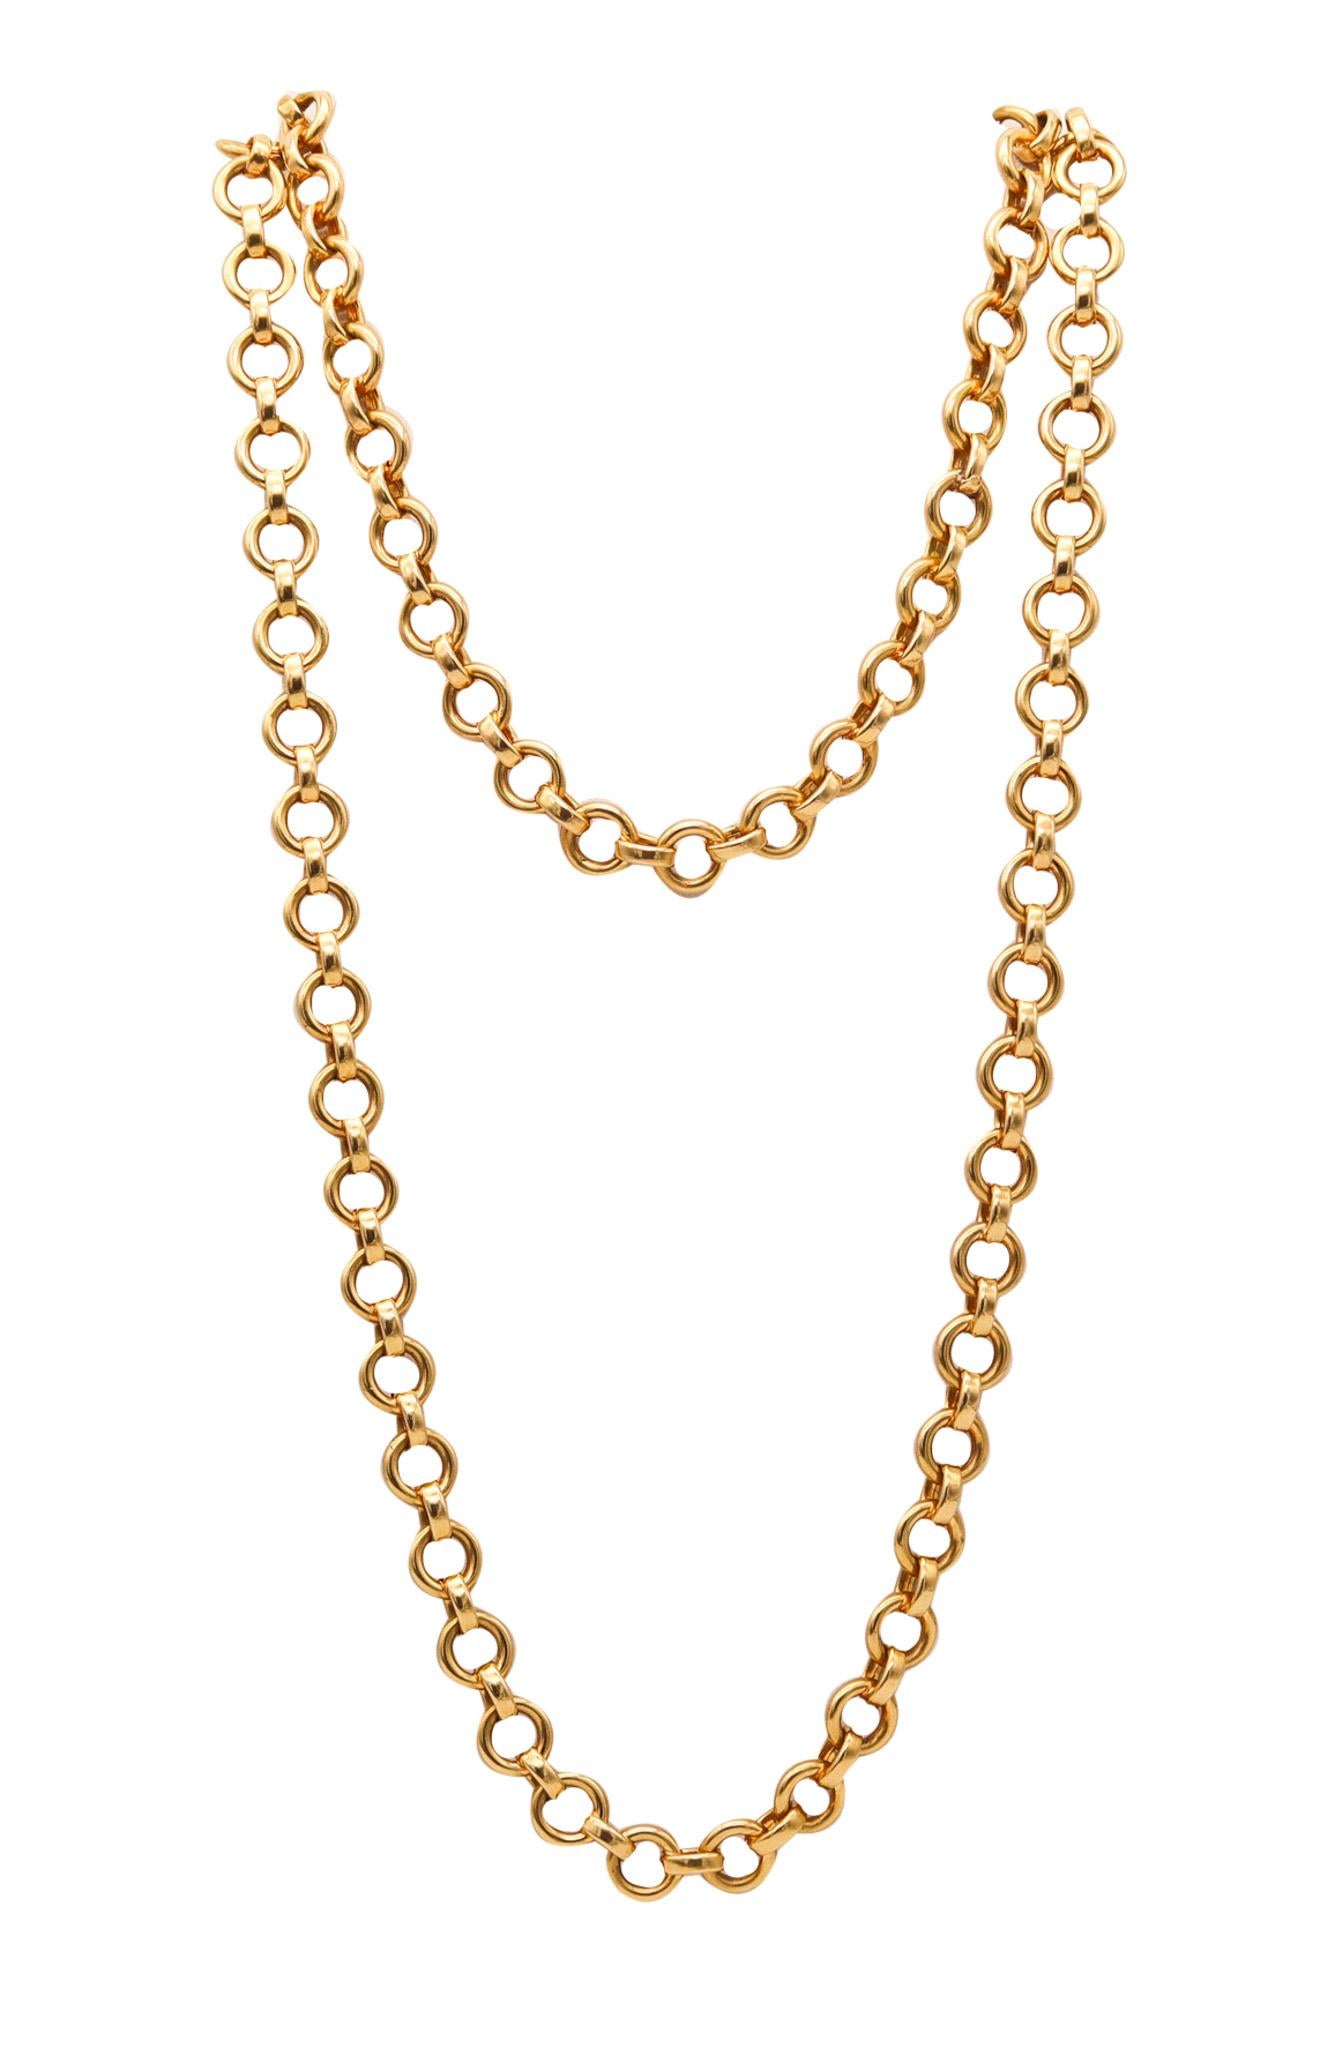 Bruno Dal Lago 1970 Vicenza Modernist Links Chain In Polished 18Kt Yellow Gold For Sale